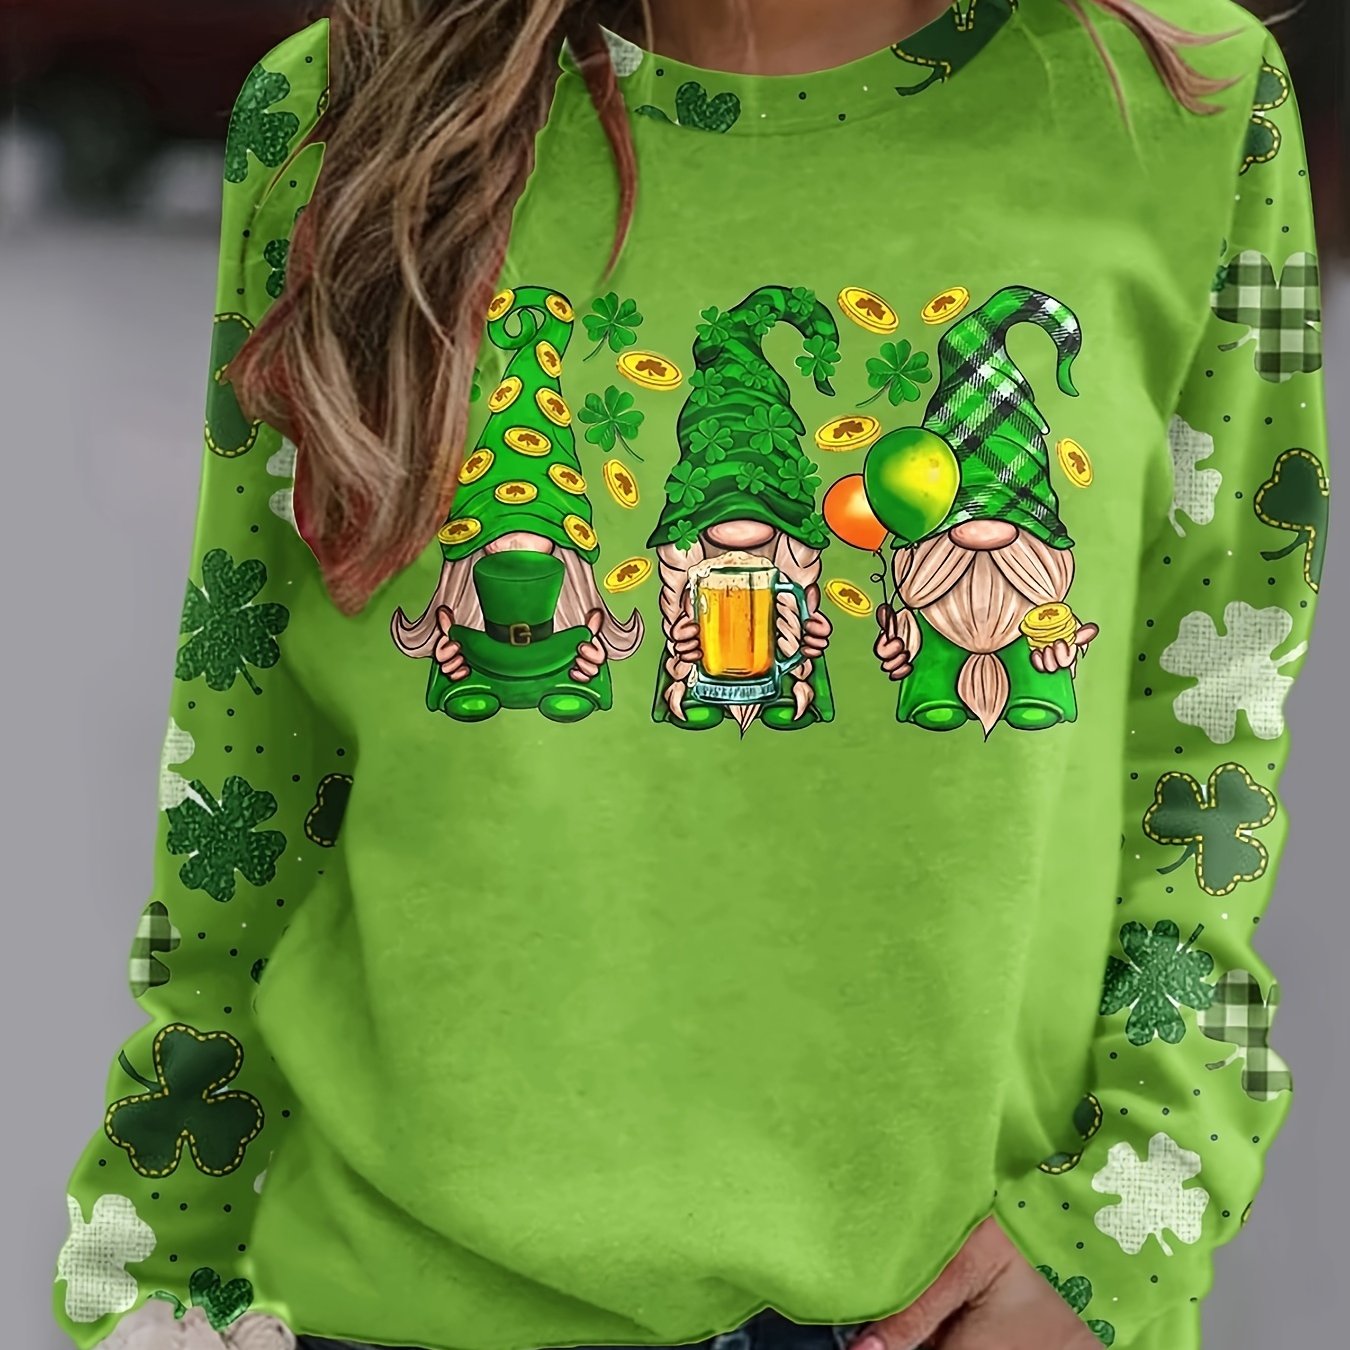 Four-leaf Clover & Gnomes Print T-shirt, Casual Long Sleeve Crew Neck Top For Spring & Fall, Women's Clothing